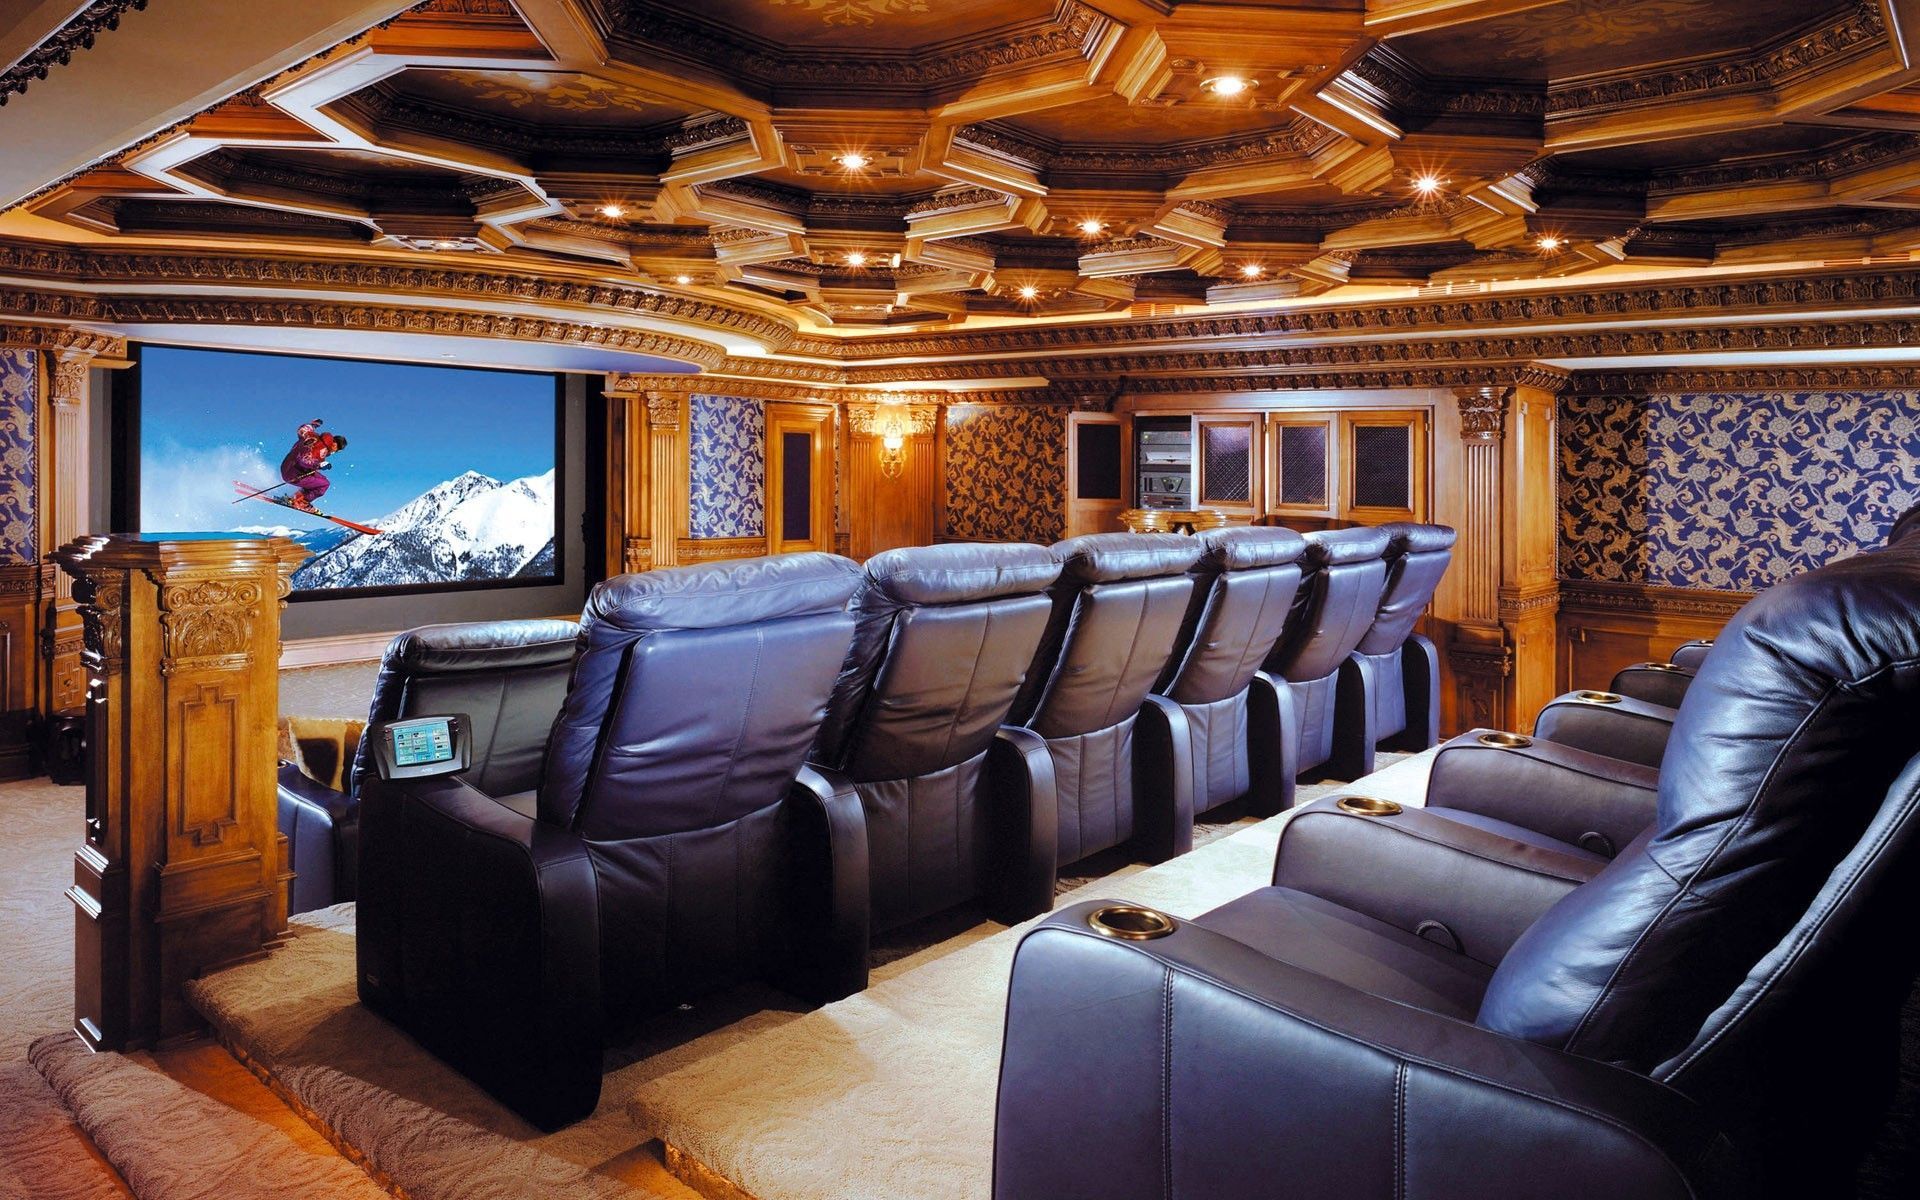 Luxury Home Theater wallpapers and images - wallpapers, pictures ...